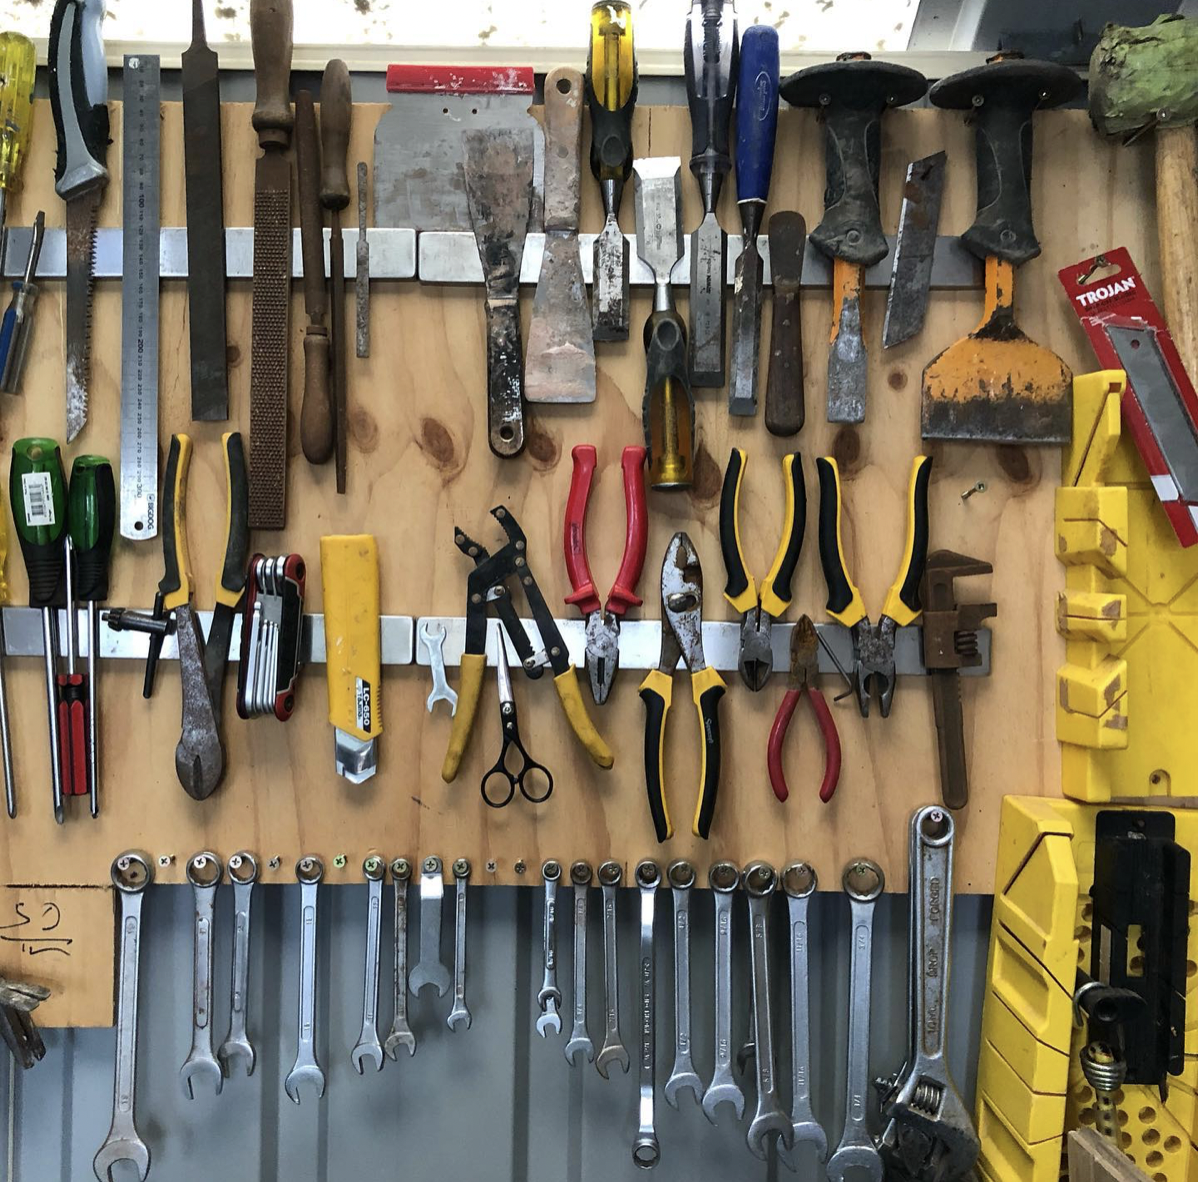 Metal Strips For Wall Tool Storage Ideas